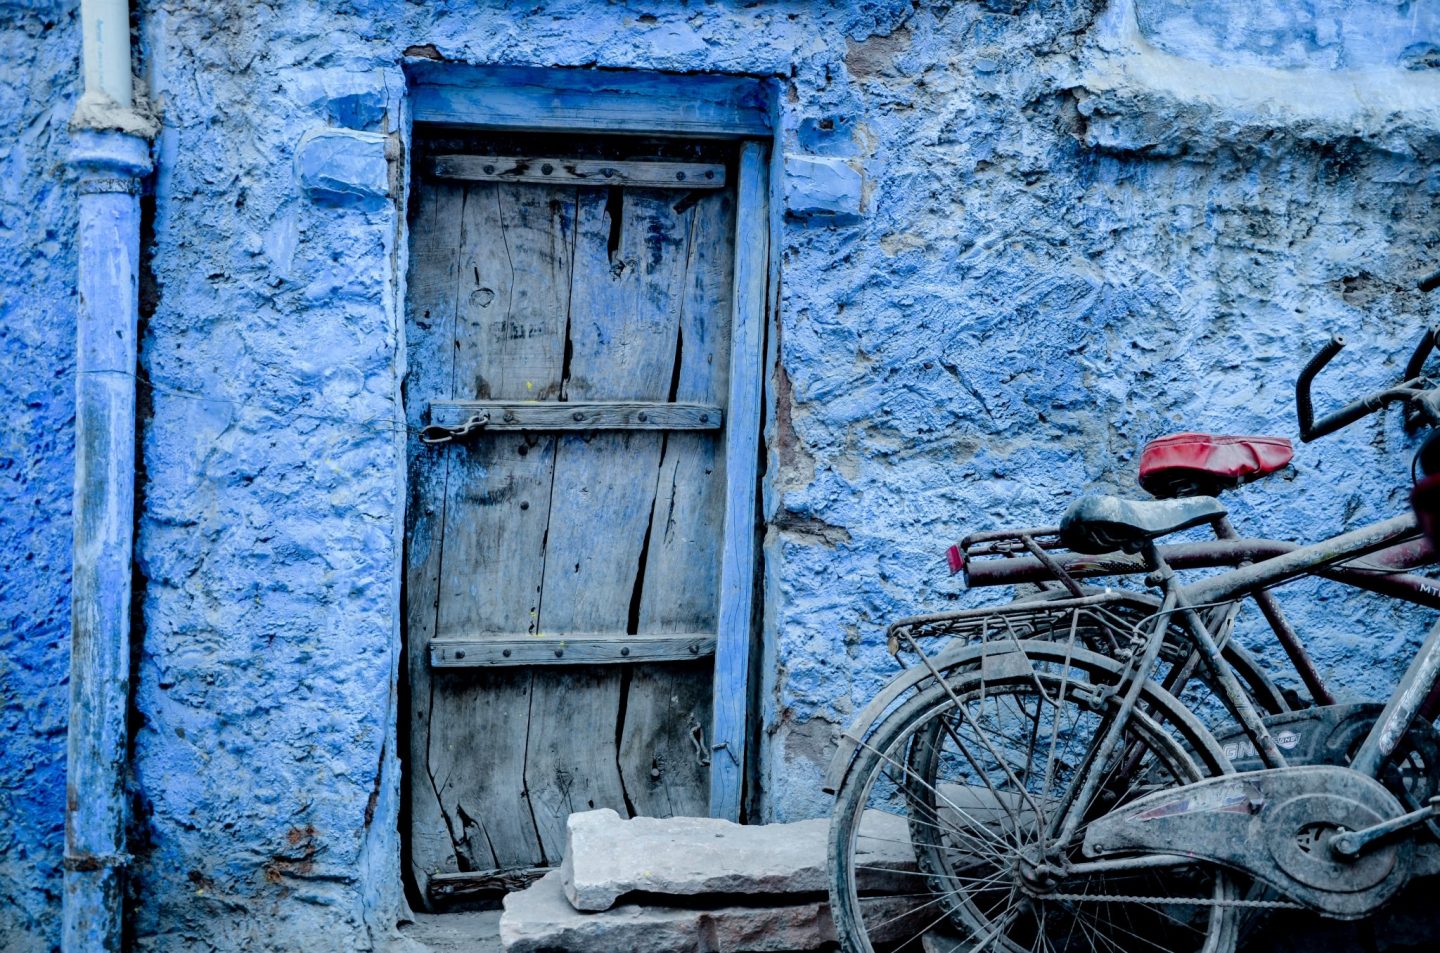 Jodhpur, India is one of the world's most colourful cities